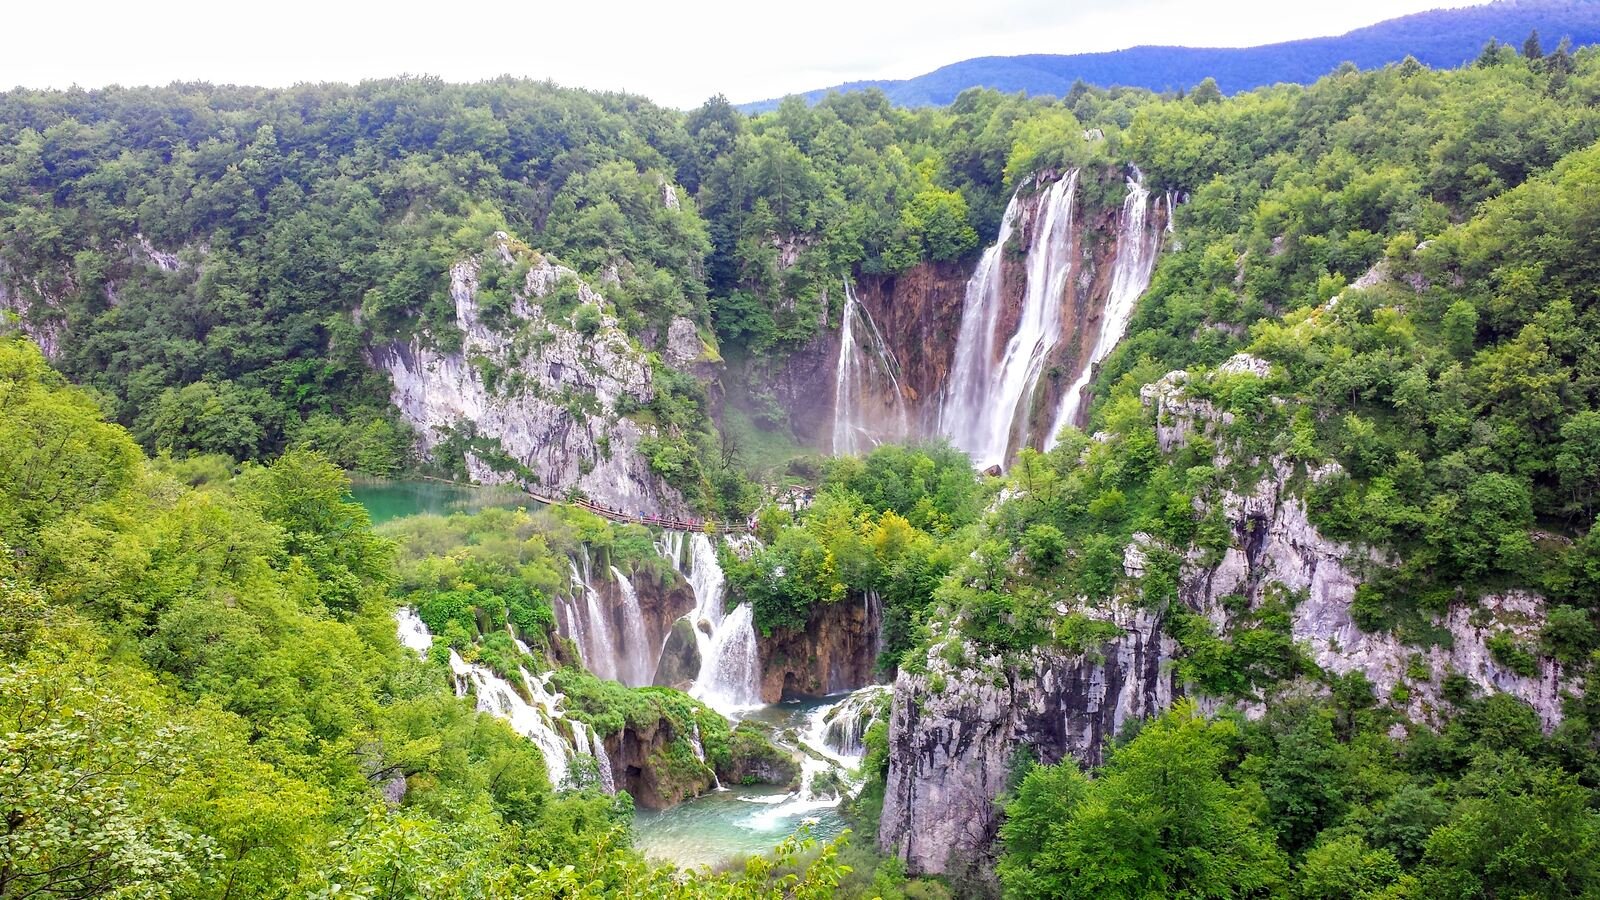 A landscape view of waterfalls tumbling down cliffsides into turquoise pools at the bottom in Plitvice National Park, Croatia. The water is surrounded by lush greenery